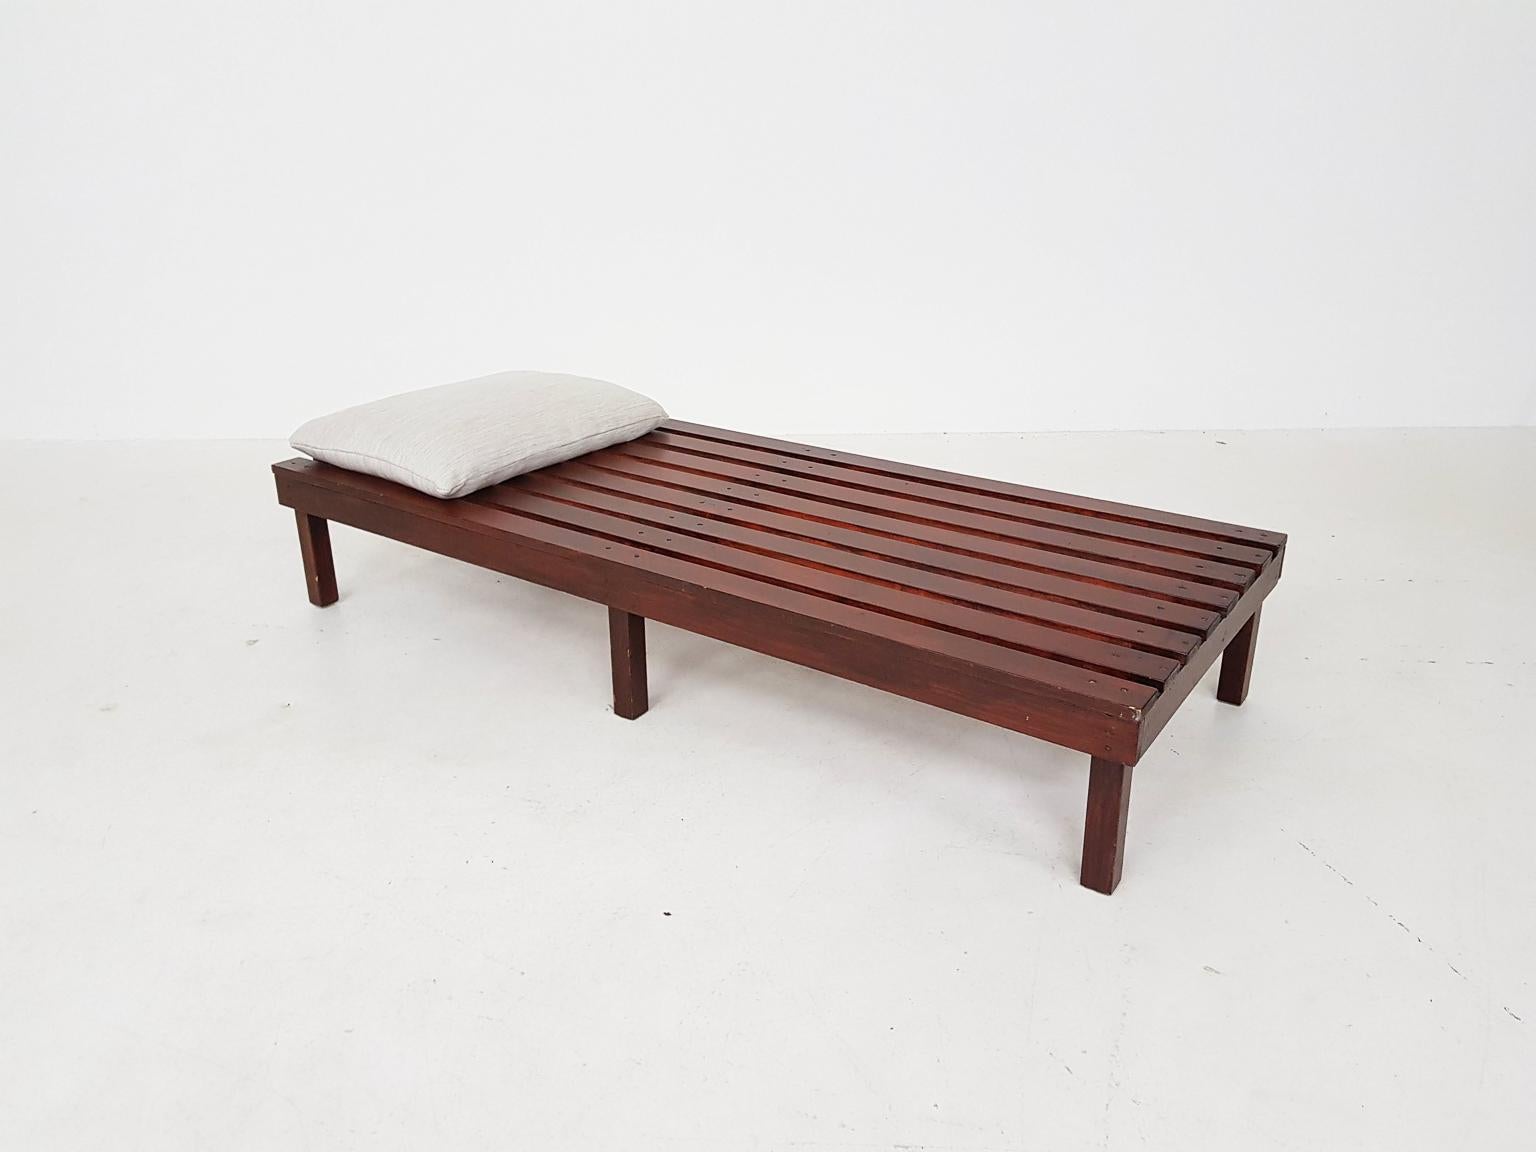 Wood Martin Visser or Charlotte Perriand Style Slat Bench or Daybed, Dutch, 1950s